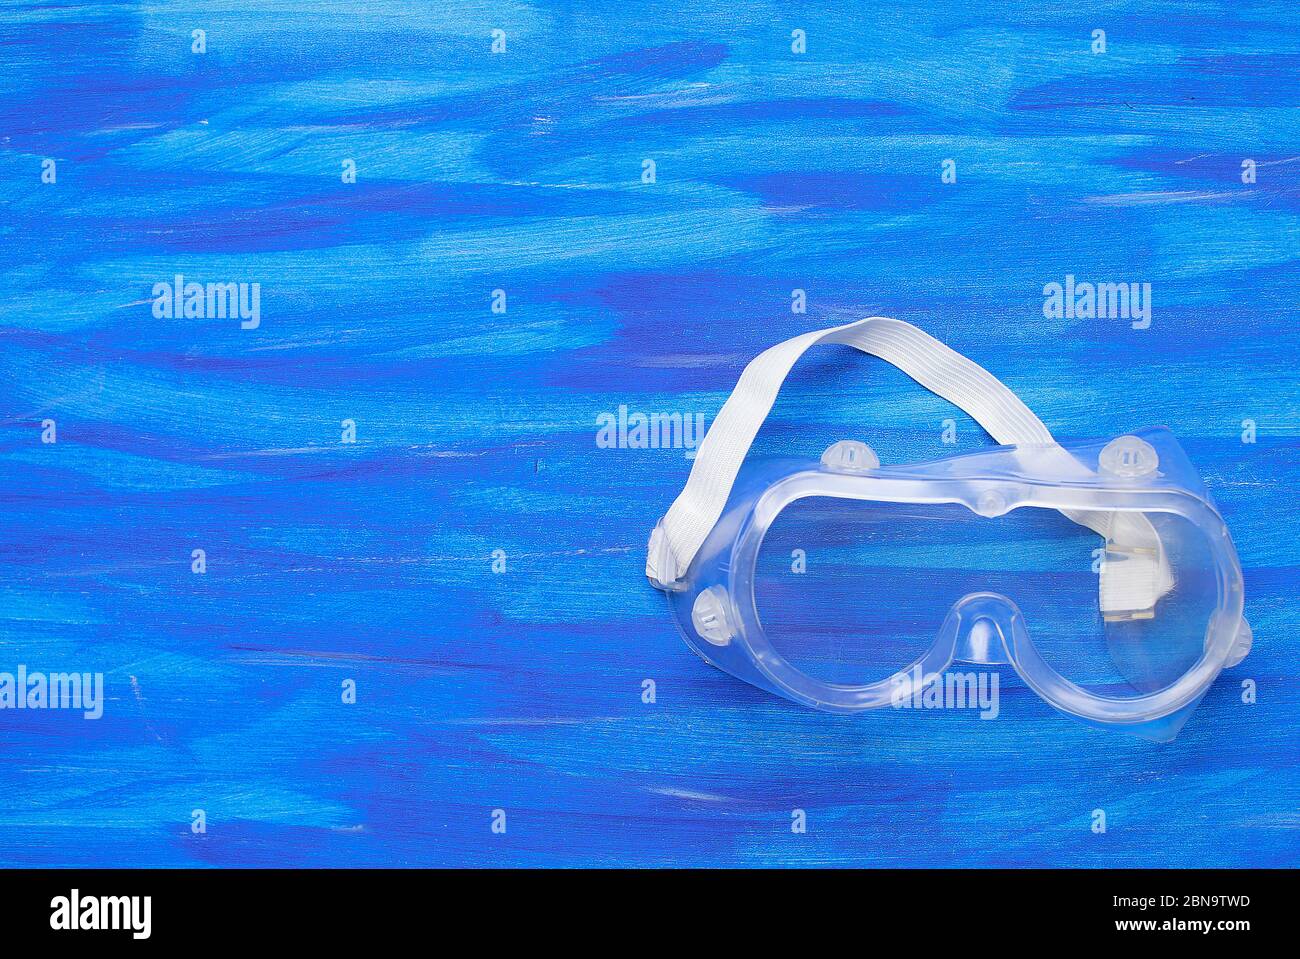 Plastic safety goggles on blue background Stock Photo